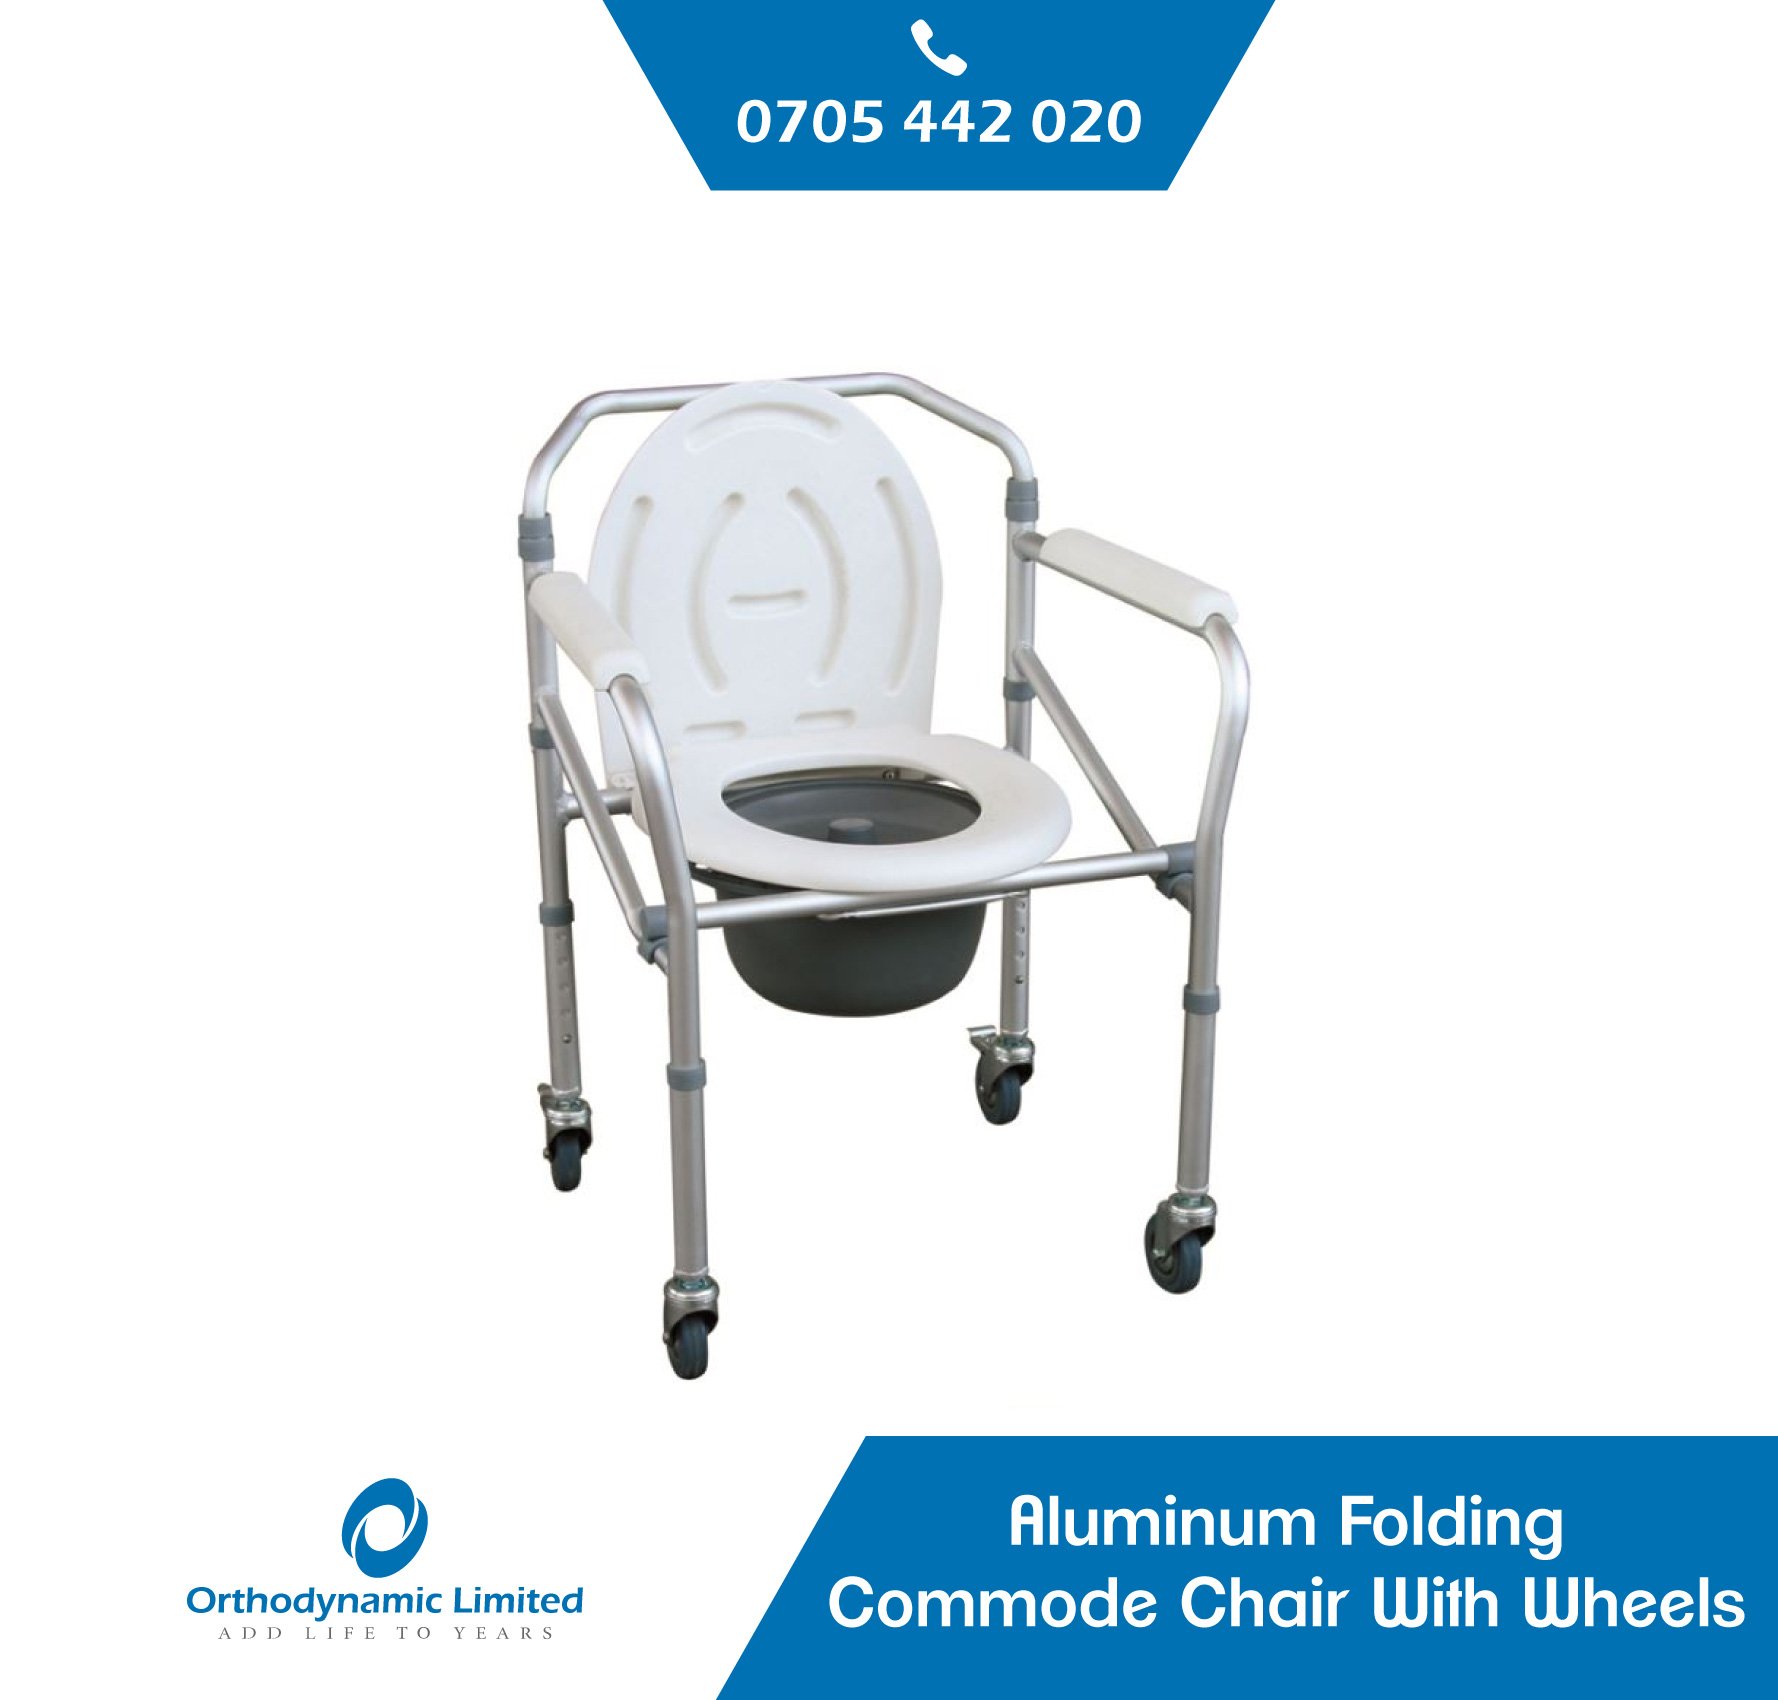 Portable Commode chair with wheels